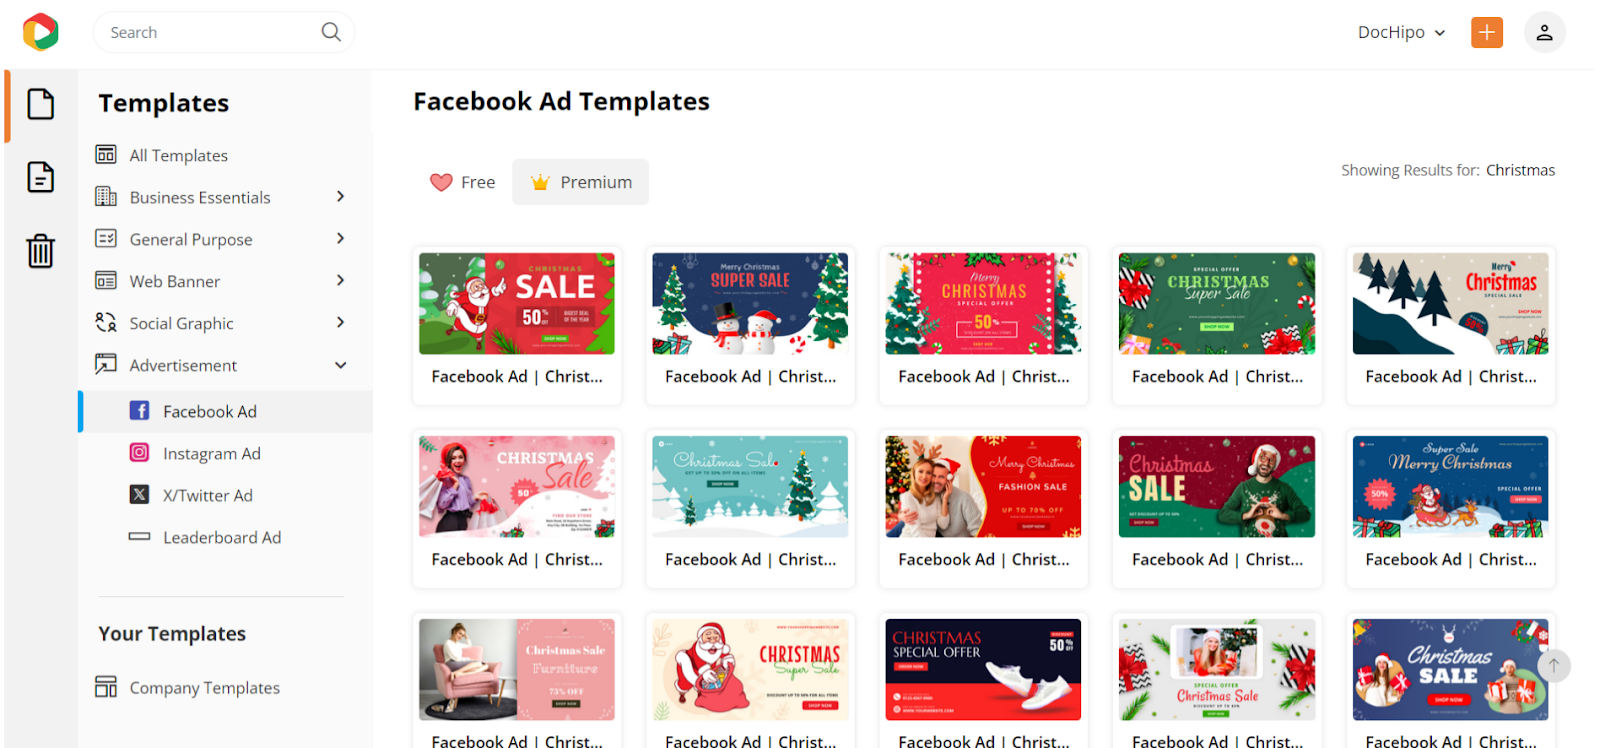 DocHipo Templates with Christmas fonts